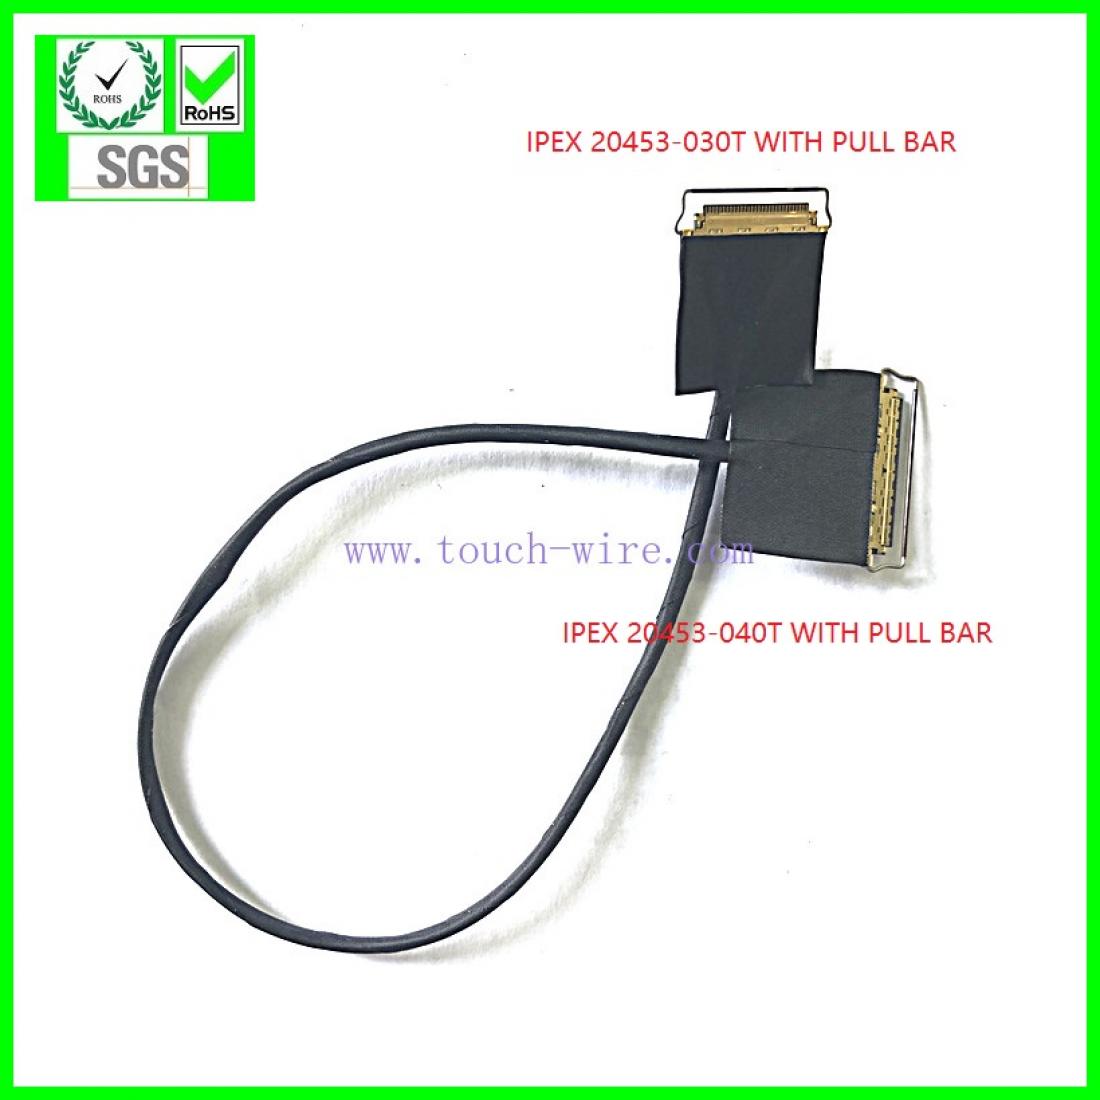 eDP CABLE, SGC CABLE, IPEX20453-030T-01 to IPEX 20453-040T-01, UL10005 40AWG coaxial cable